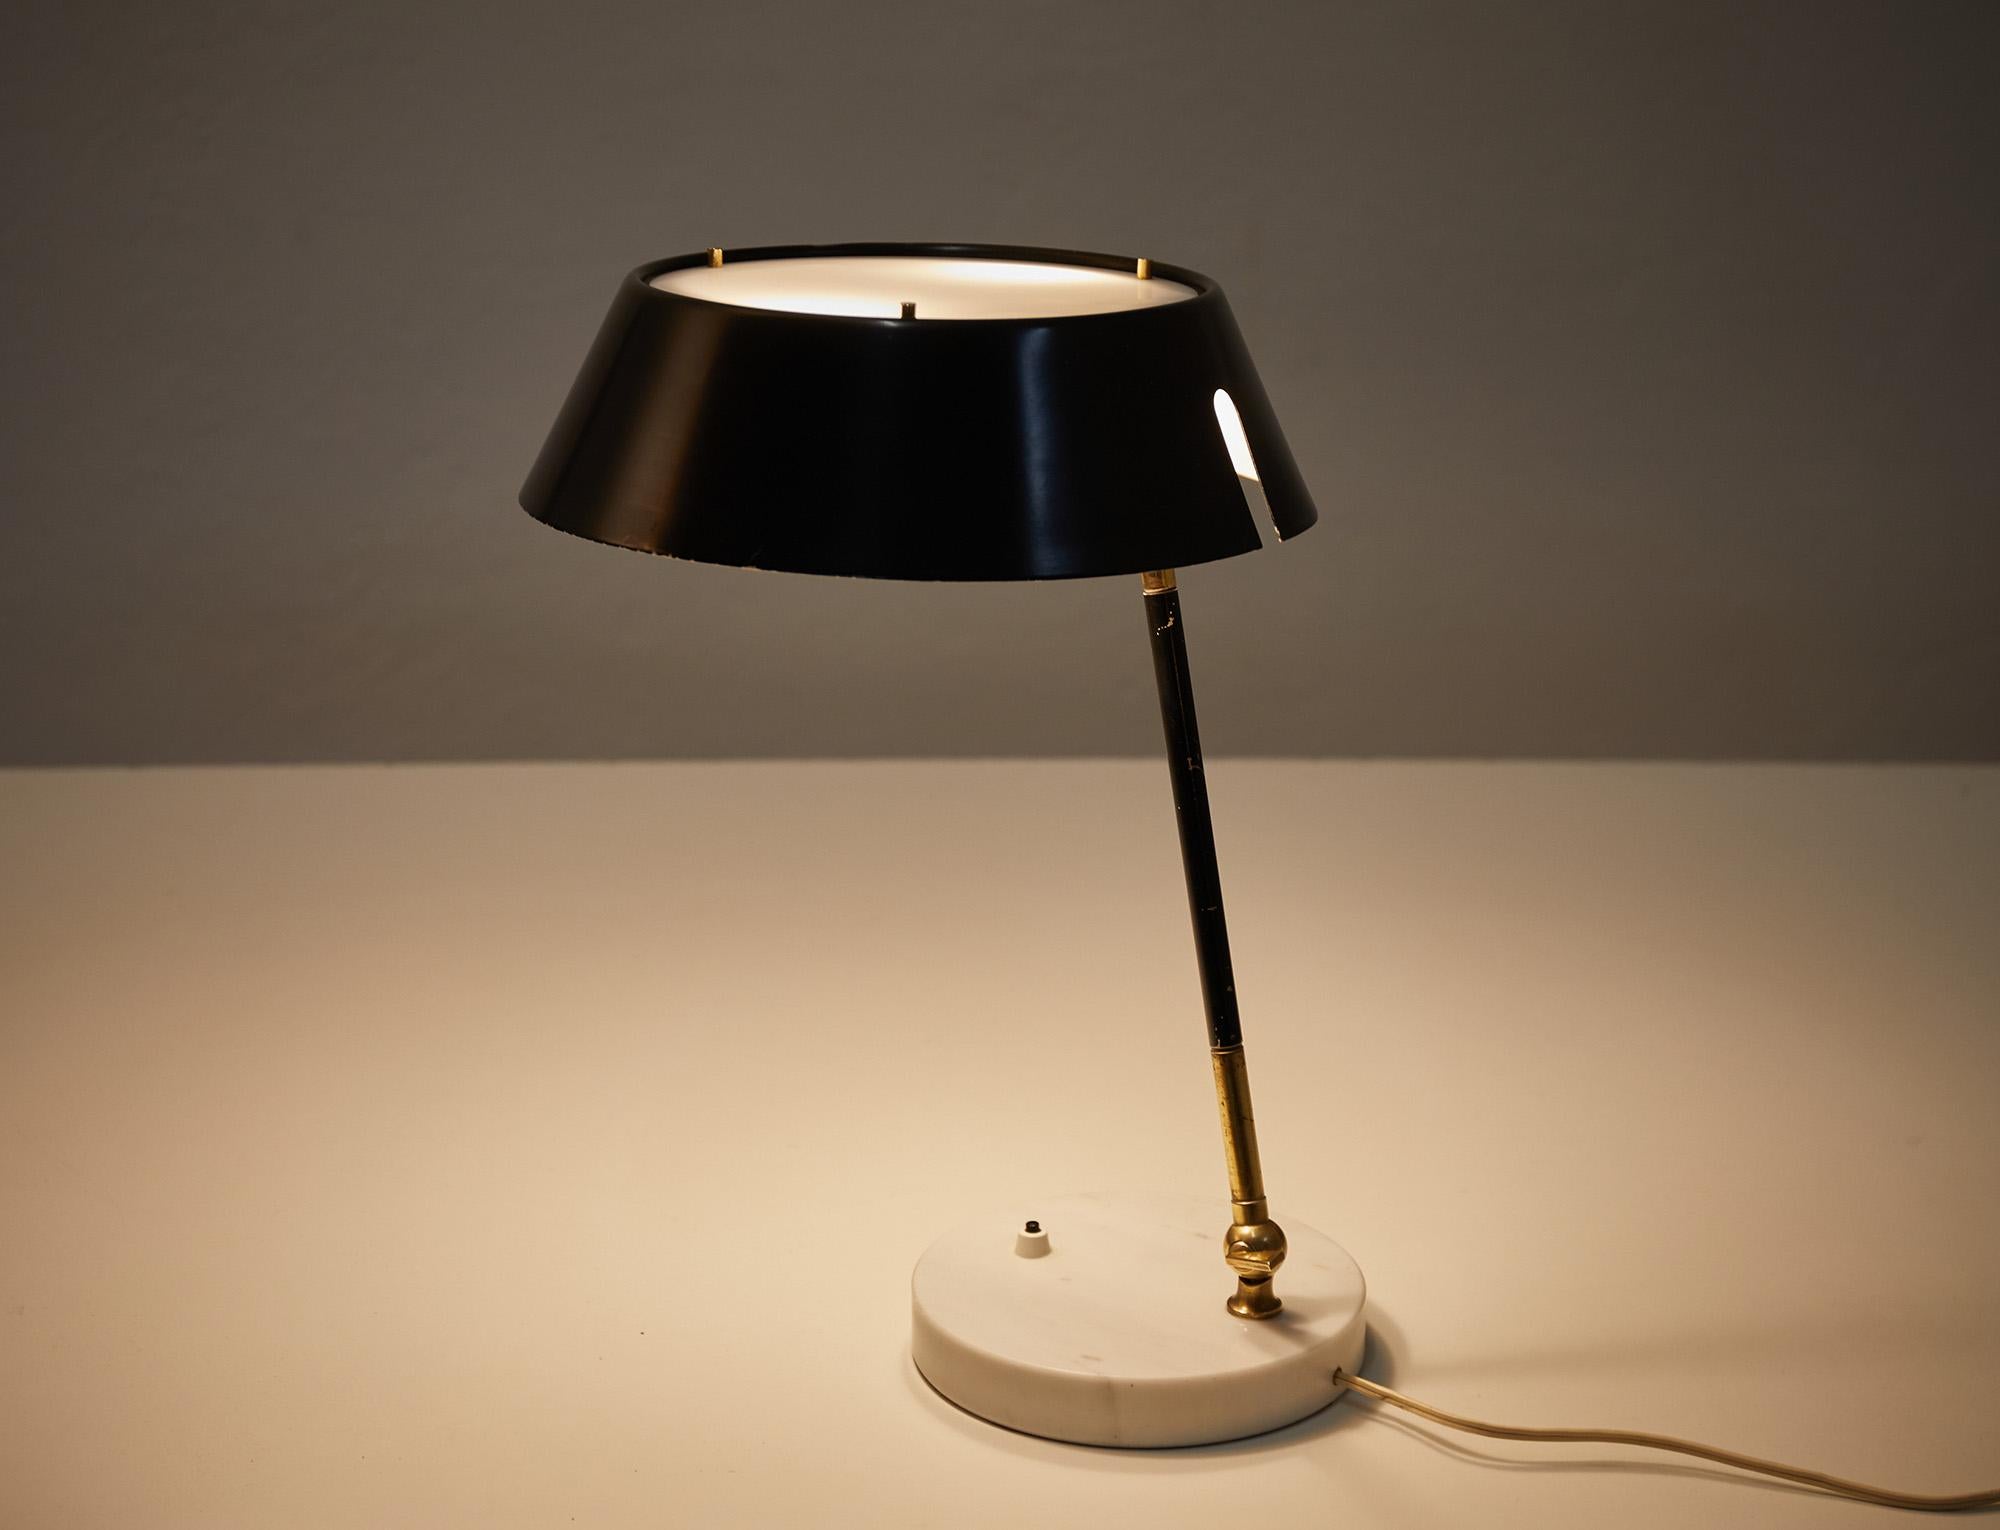 Elegant adjustable table or desk lamp designed and manufactured by Stilux, Italy around 1960. 

The lamp features a round black metal shade with on top a plexiglas diffuser for a soft light effect. The brass stem with a black lacquered middle piece